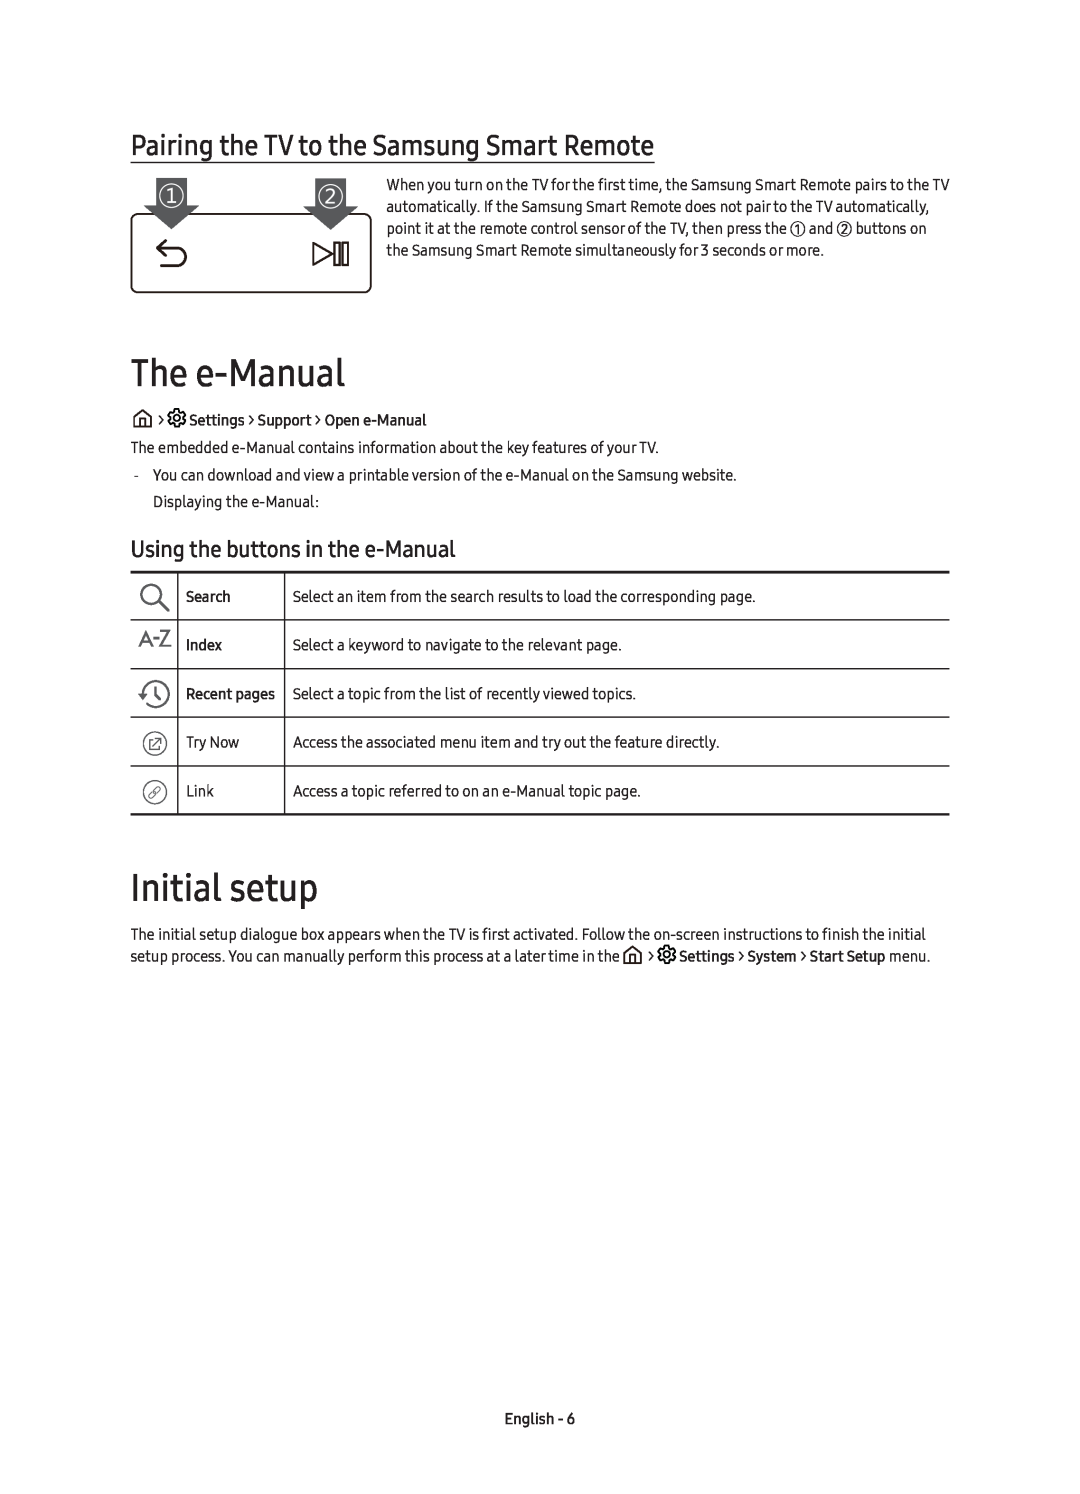 Samsung UE65KS7580UXZG The e-Manual, Initial setup, Pairing the TV to the Samsung Smart Remote, Search, Index, English 